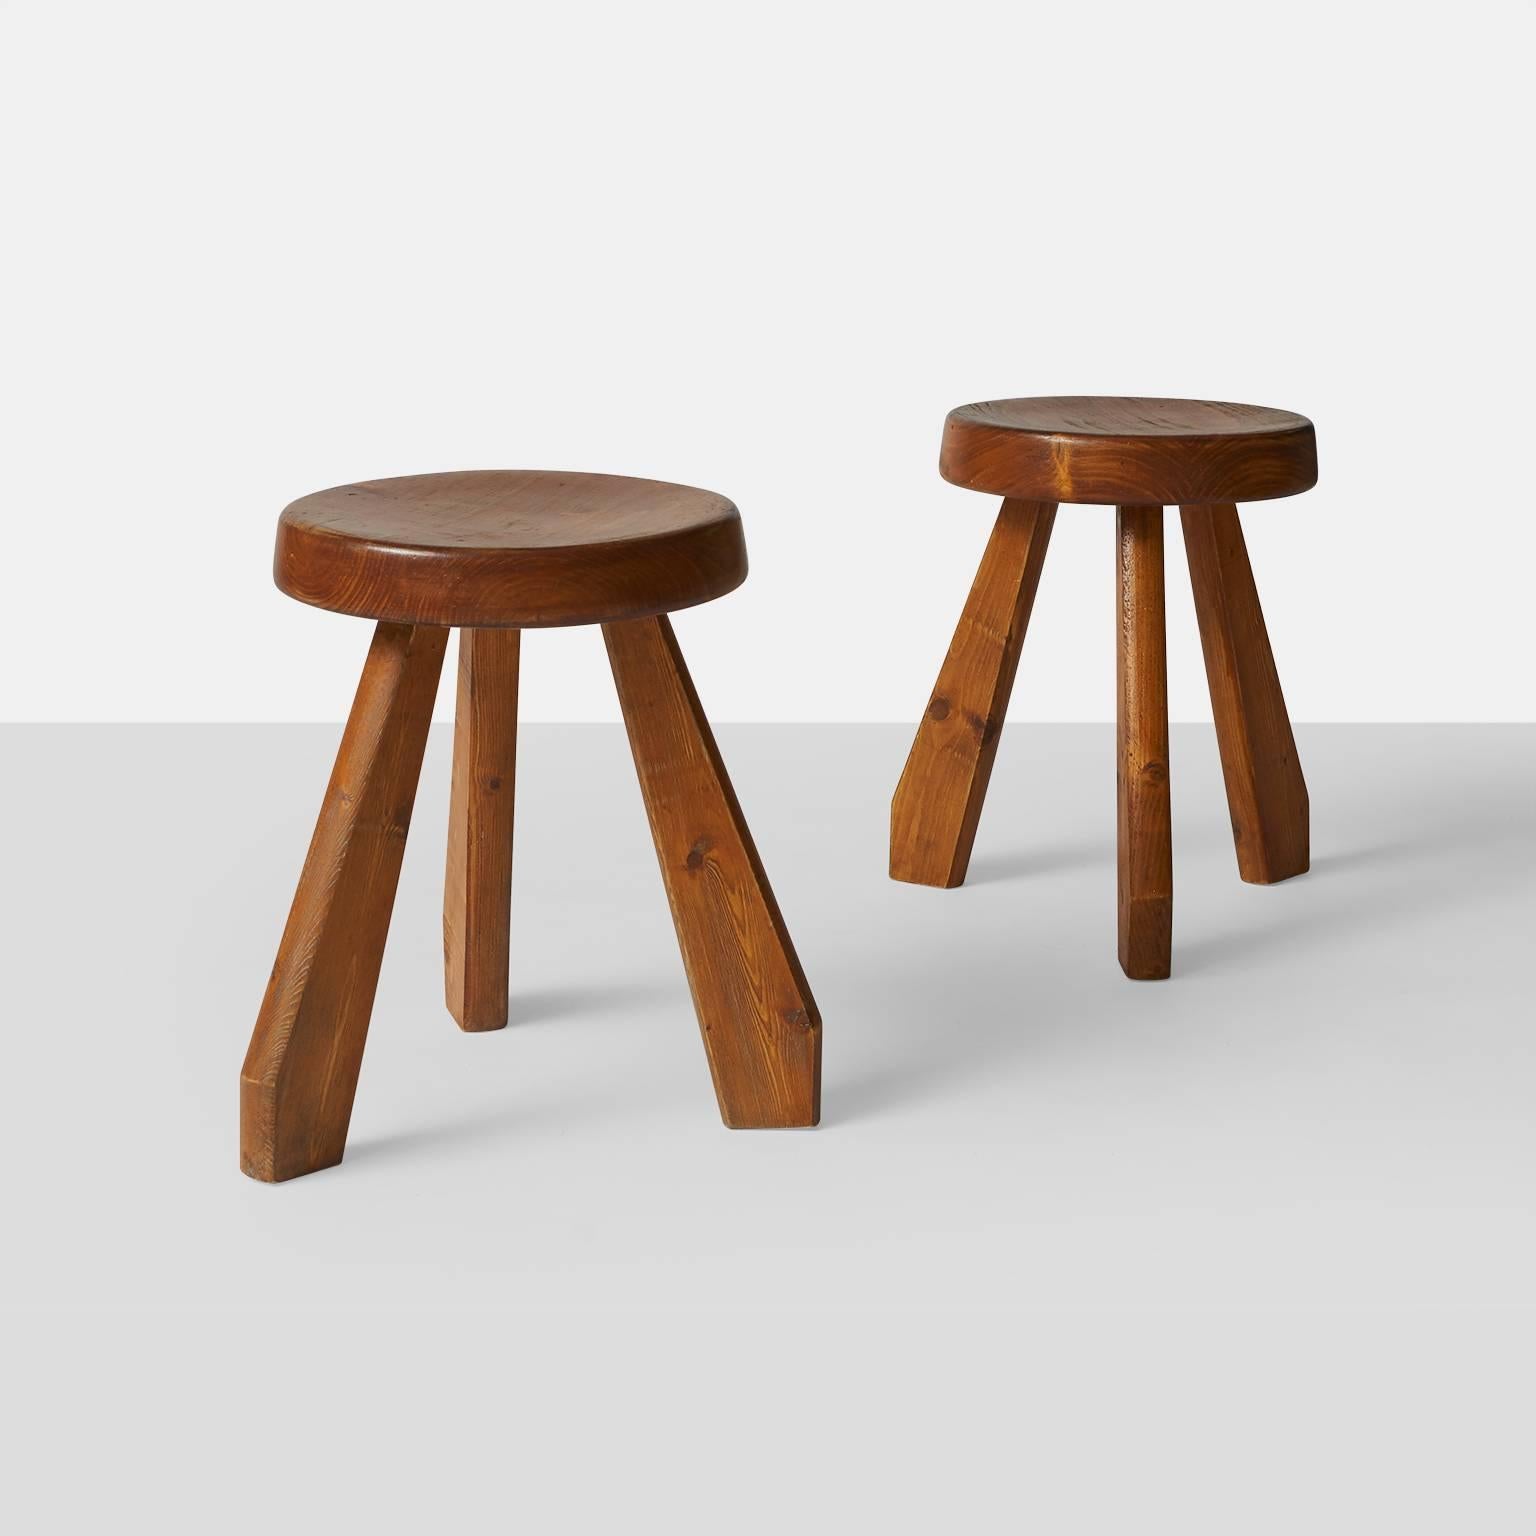 A pair of pine stools by Charlotte Perriand for Les Arcs ski resort in France with their original beautiful patina. Made in France, circa 1960.